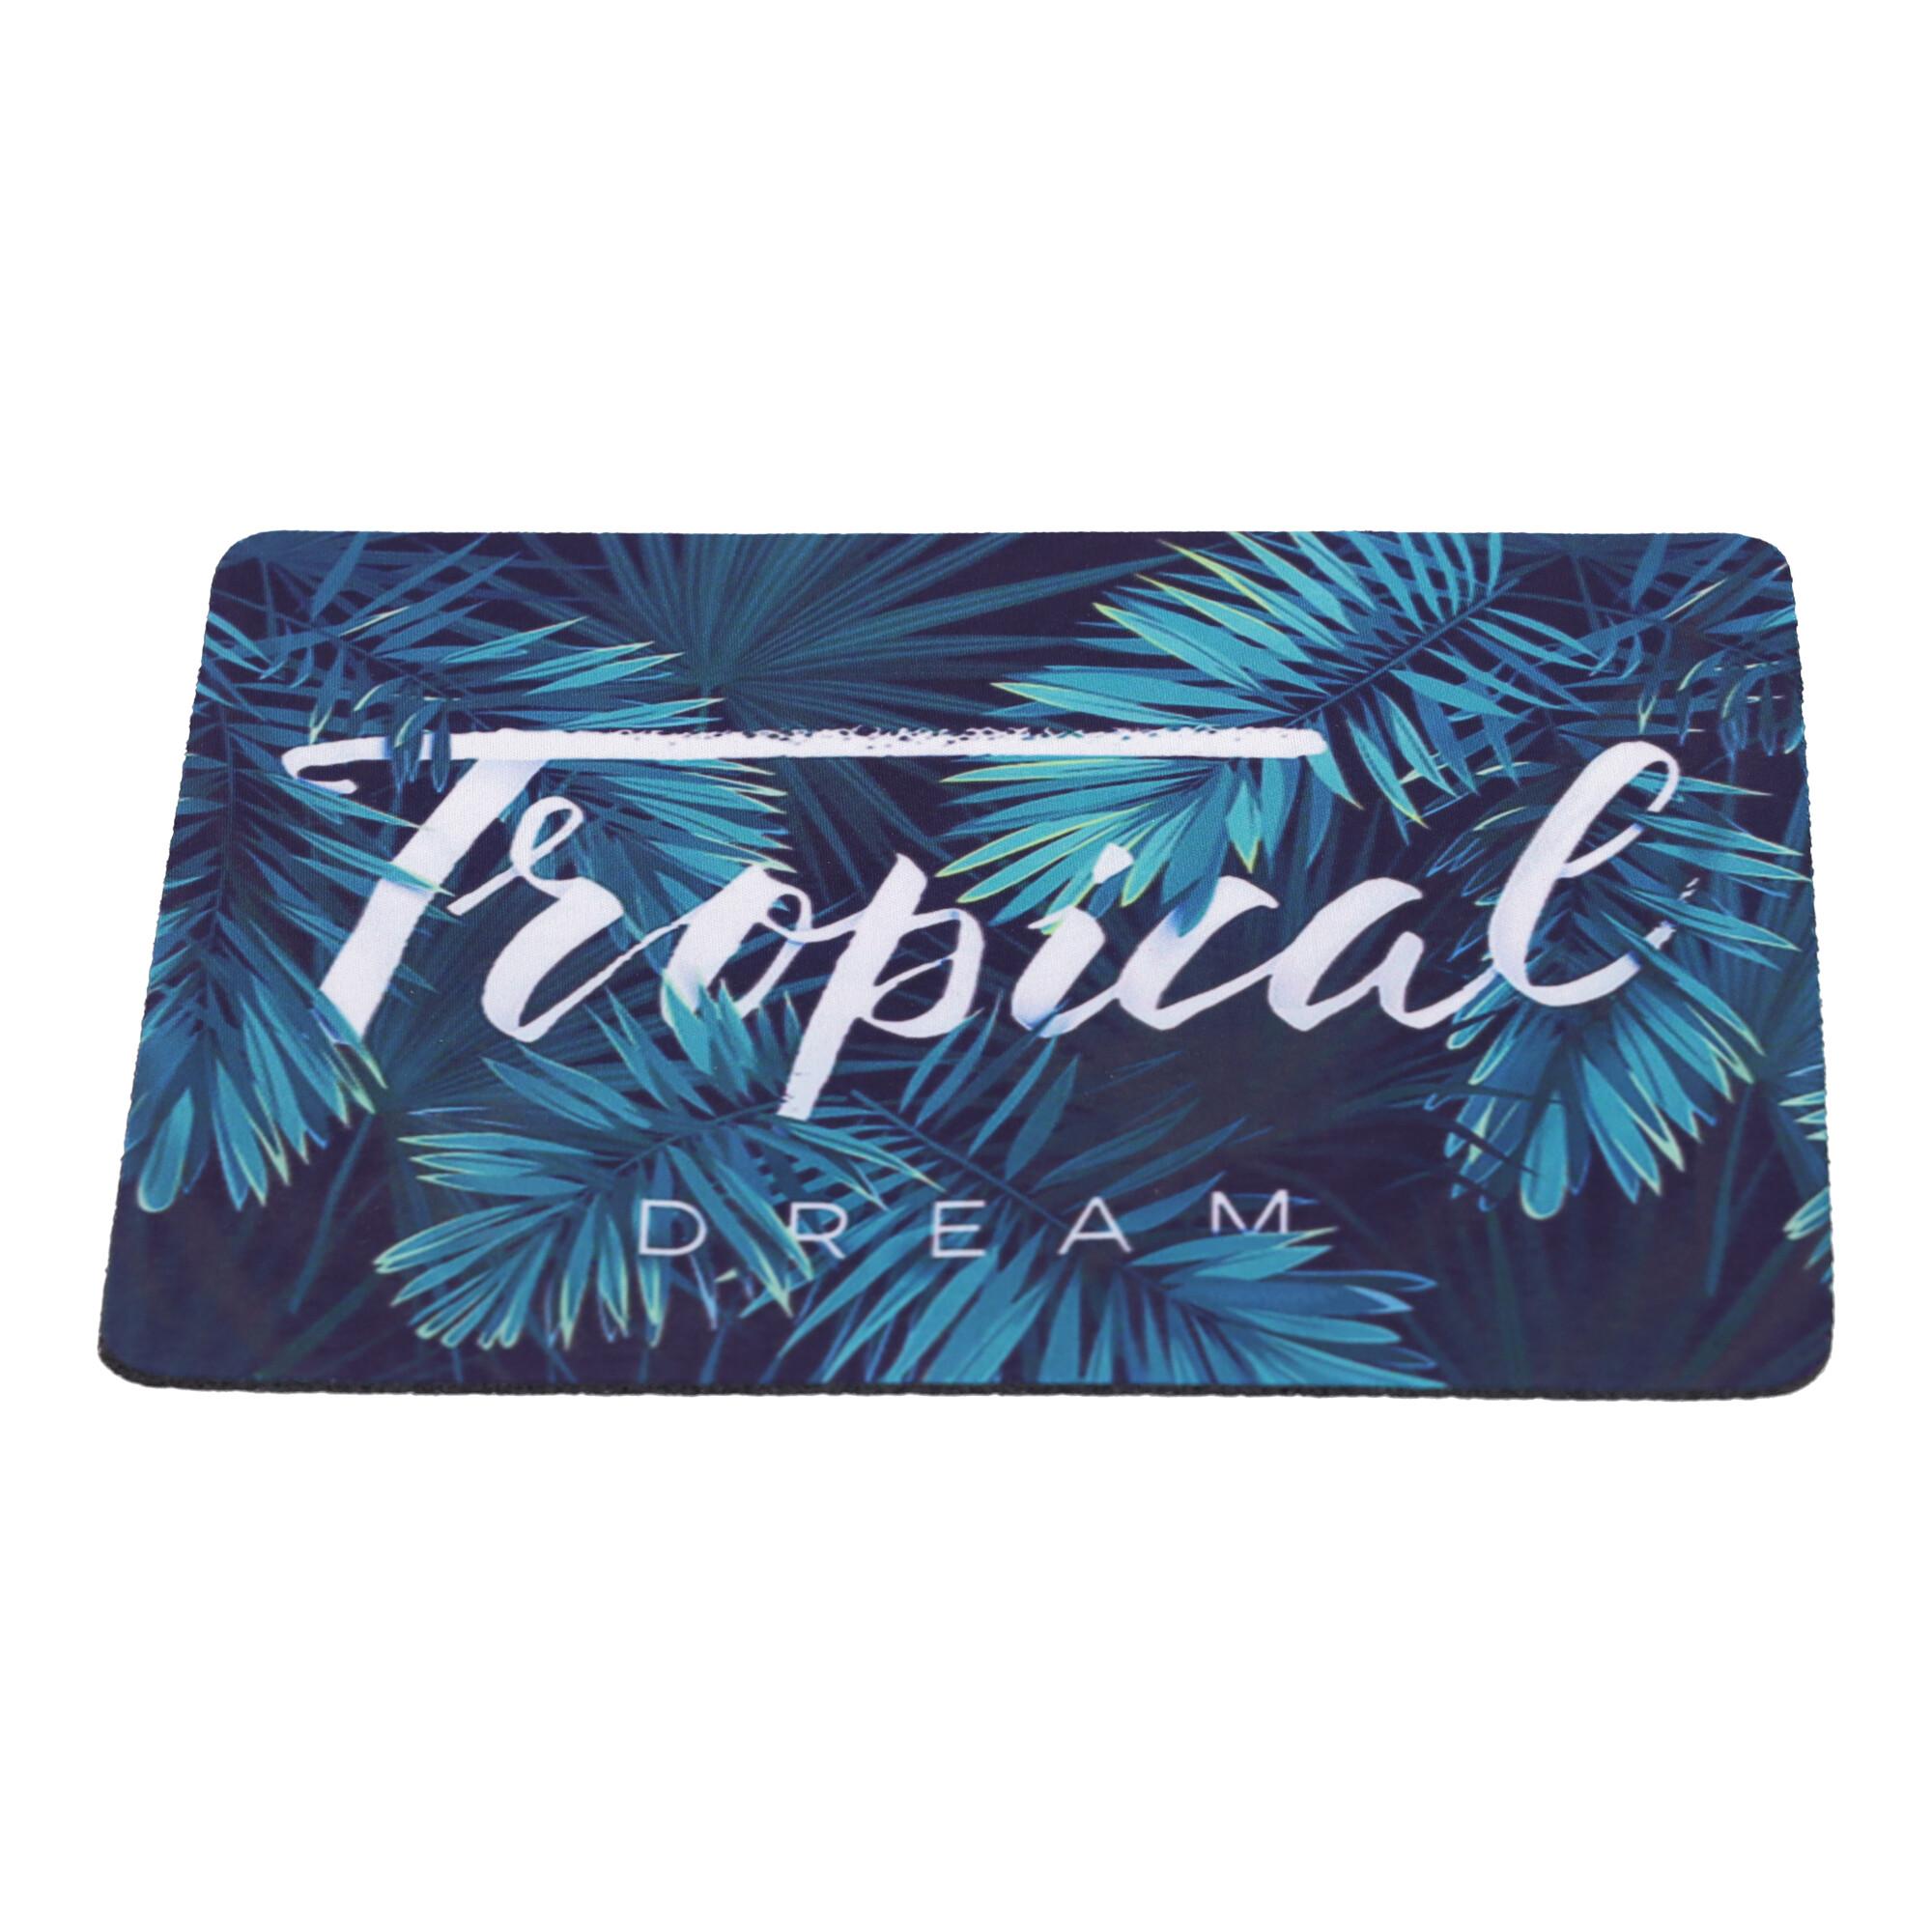 Mouse pad - Tropical forests